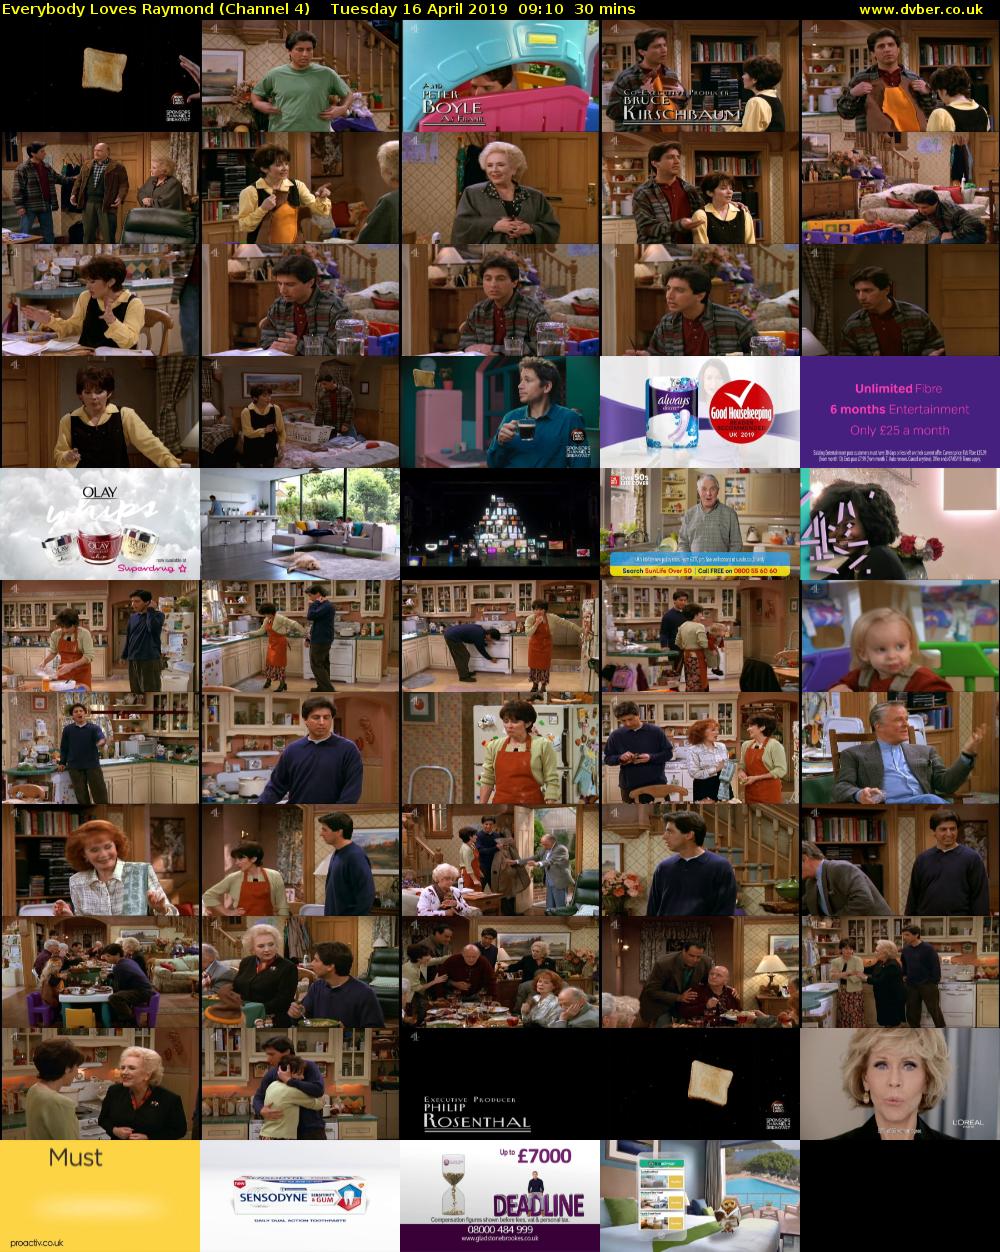 Everybody Loves Raymond (Channel 4) Tuesday 16 April 2019 09:10 - 09:40